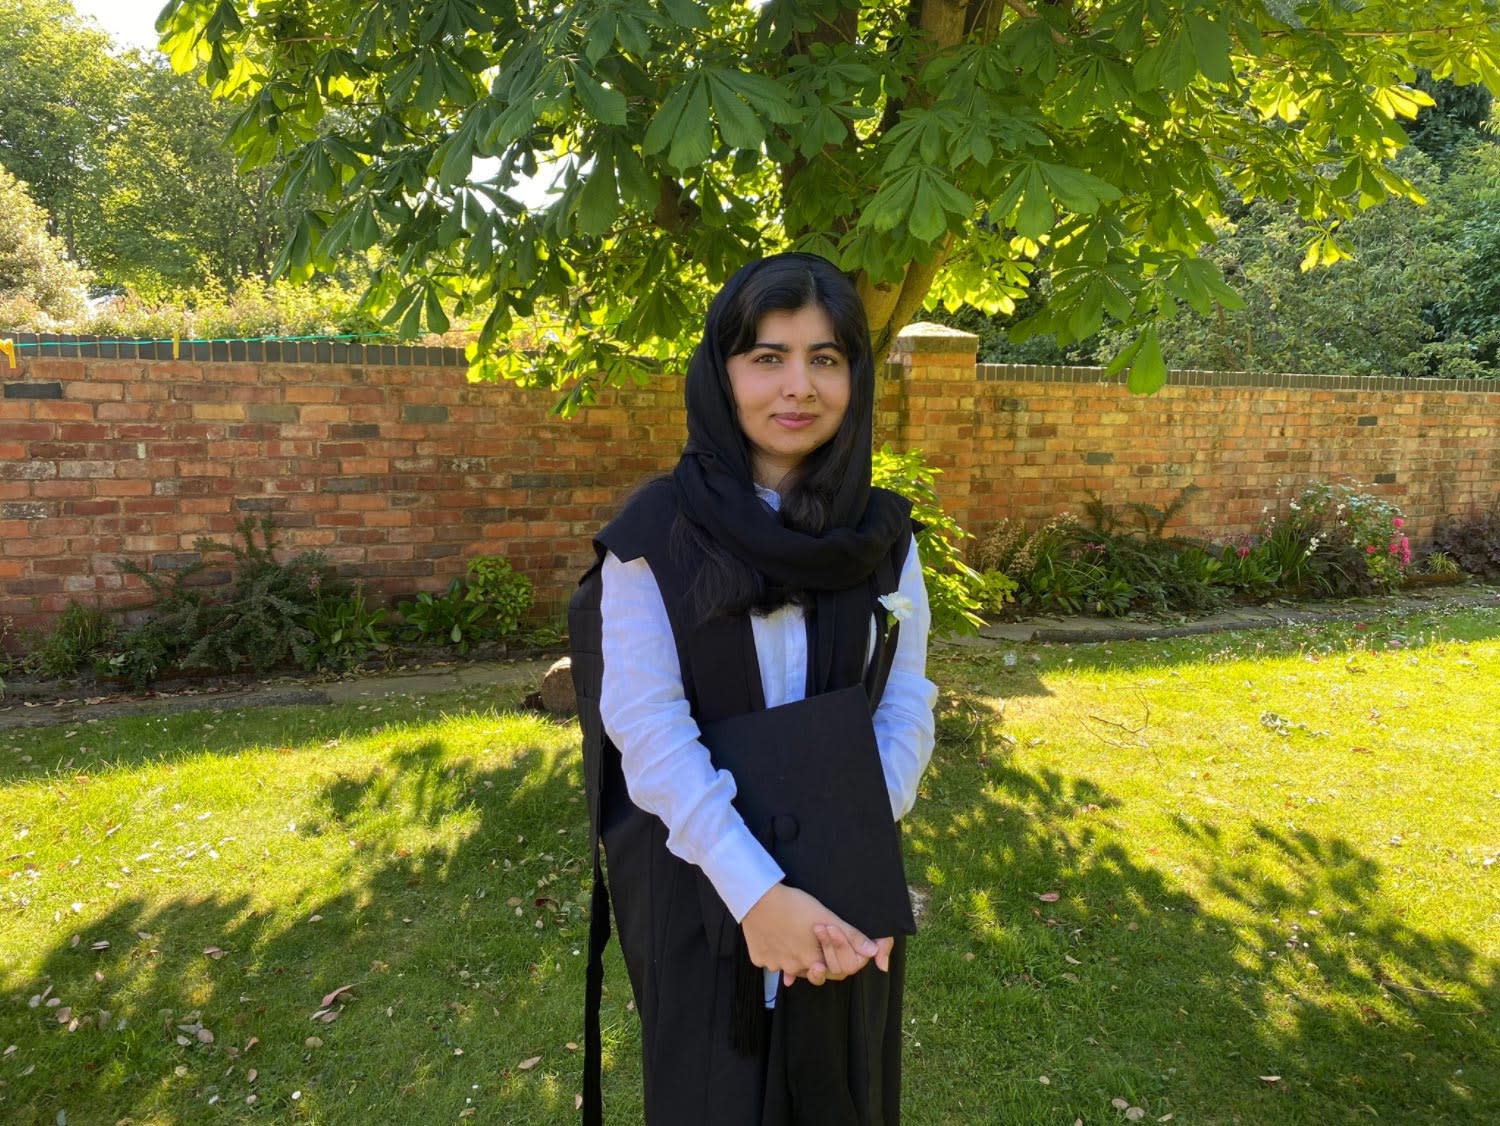 Malala in a gown for her graduation.